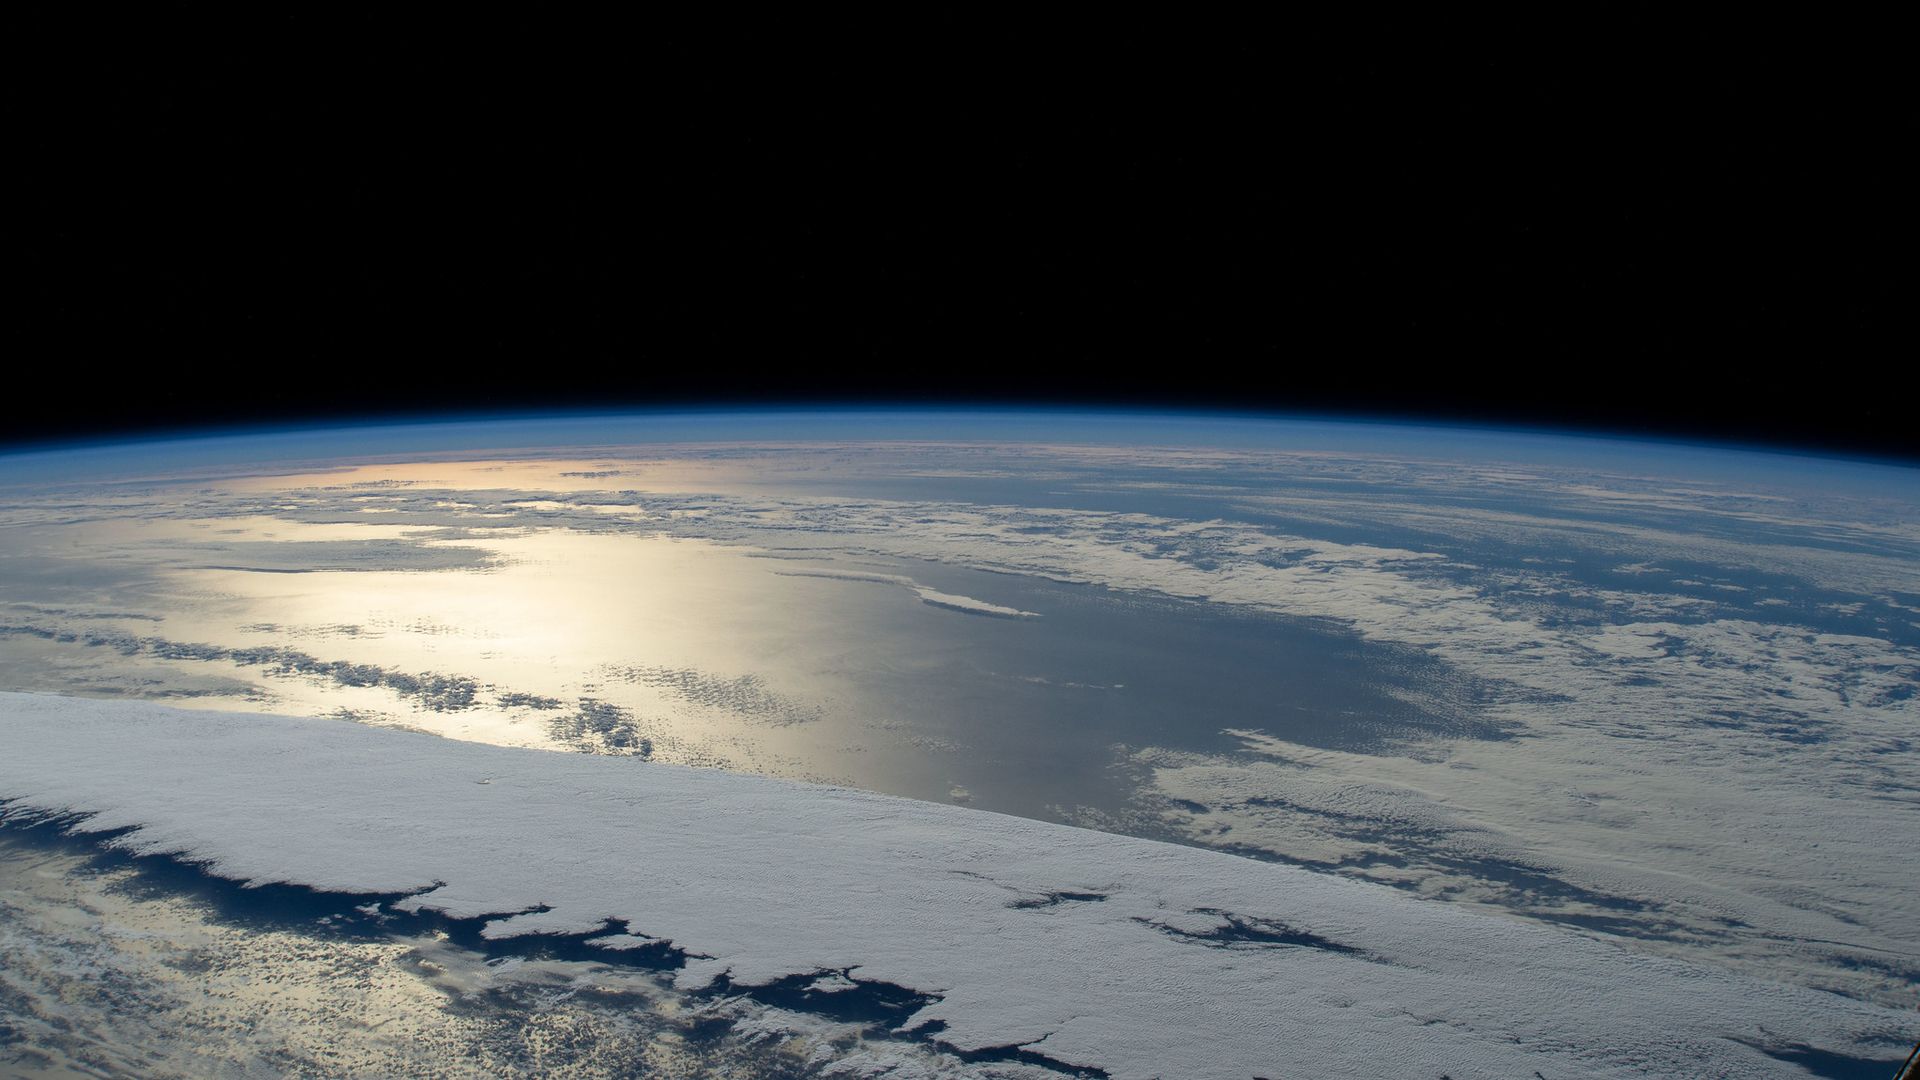 The Sun glints off the Pacific Ocean as seen from the International Space Station